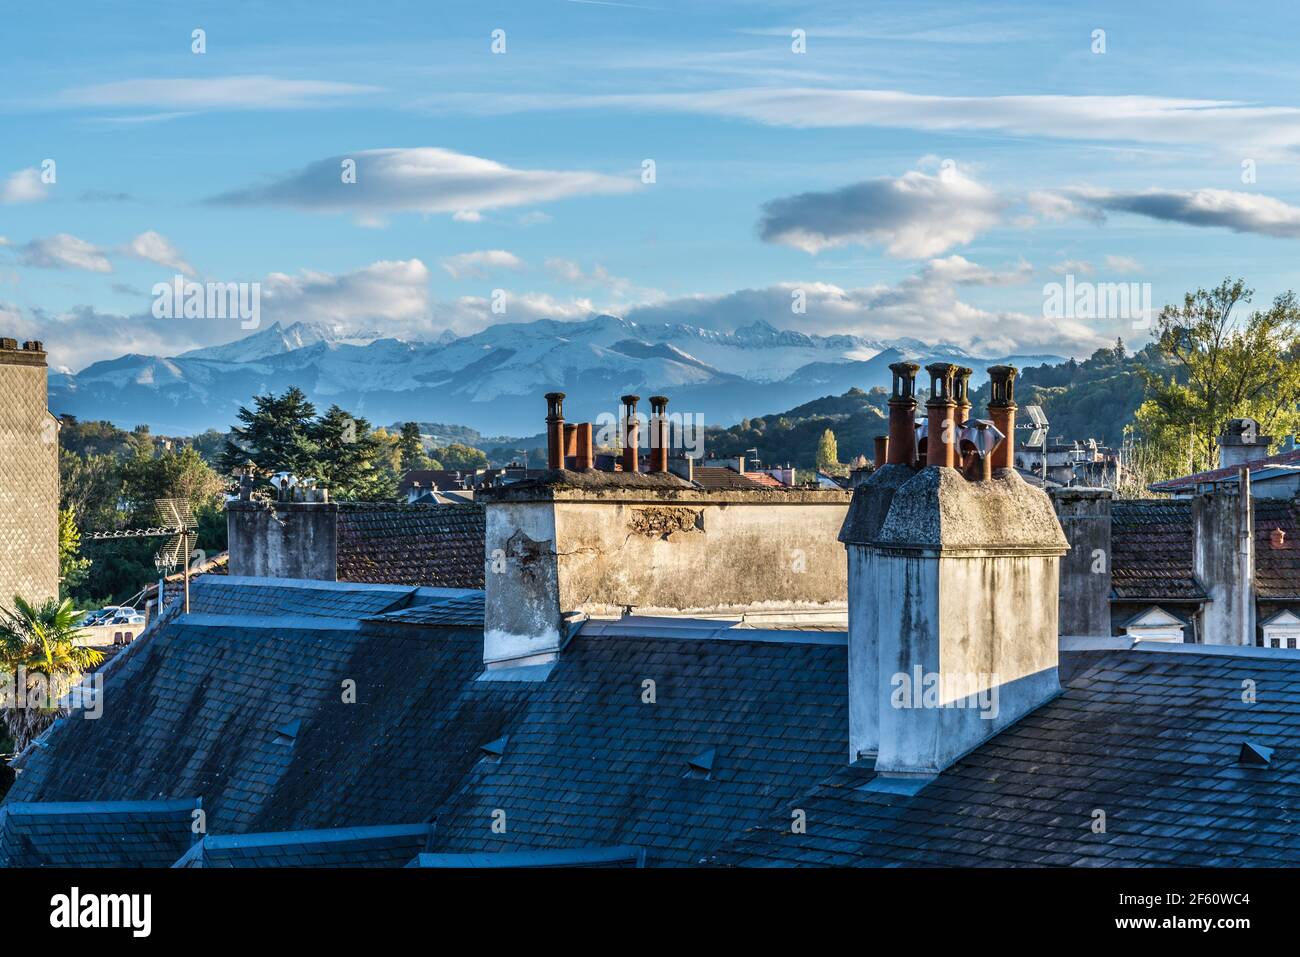 Rooftops of the buildings in French city of Pau Stock Photo